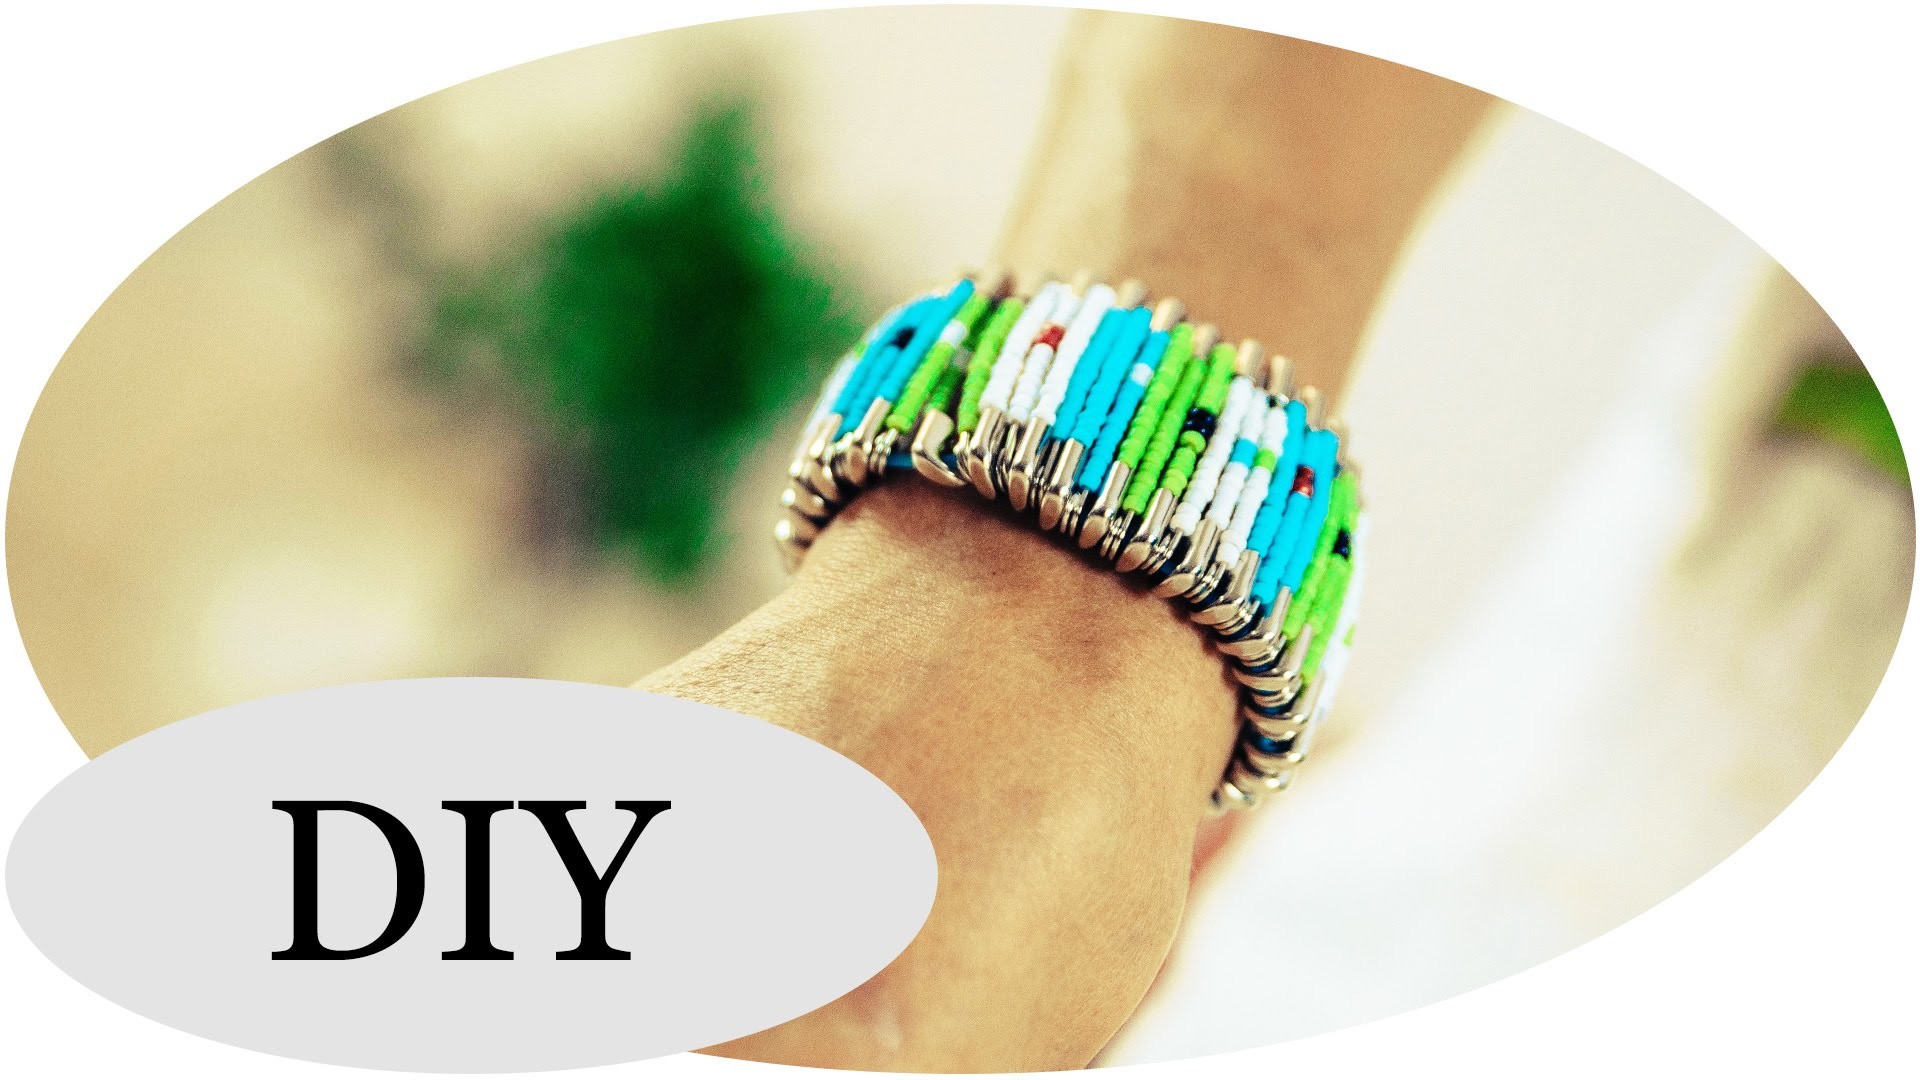 DIY Armband! How to make your own bracelet!